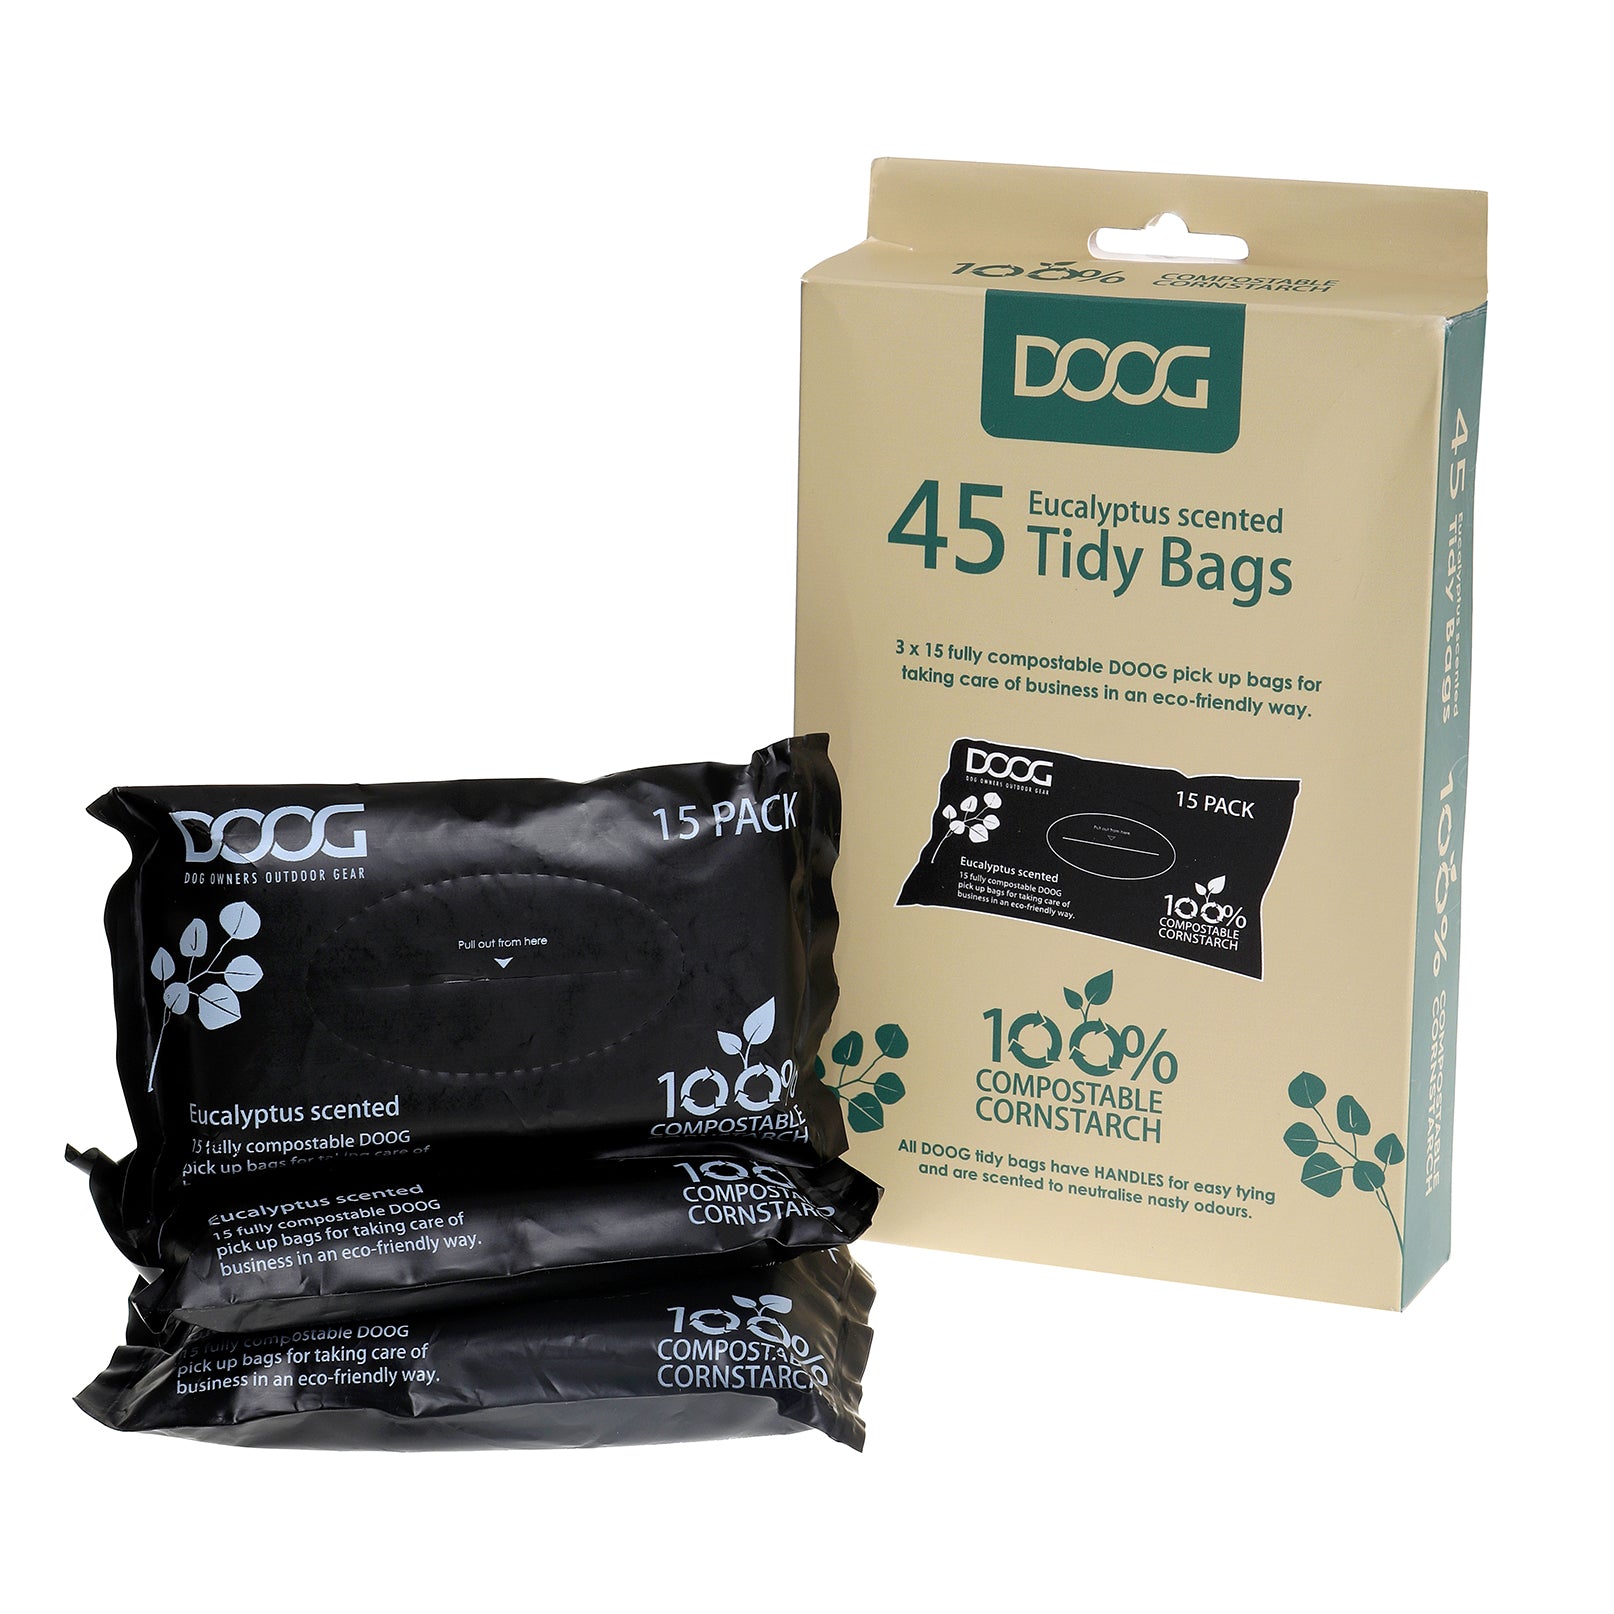 Pick Up Bags and Hand Wipes